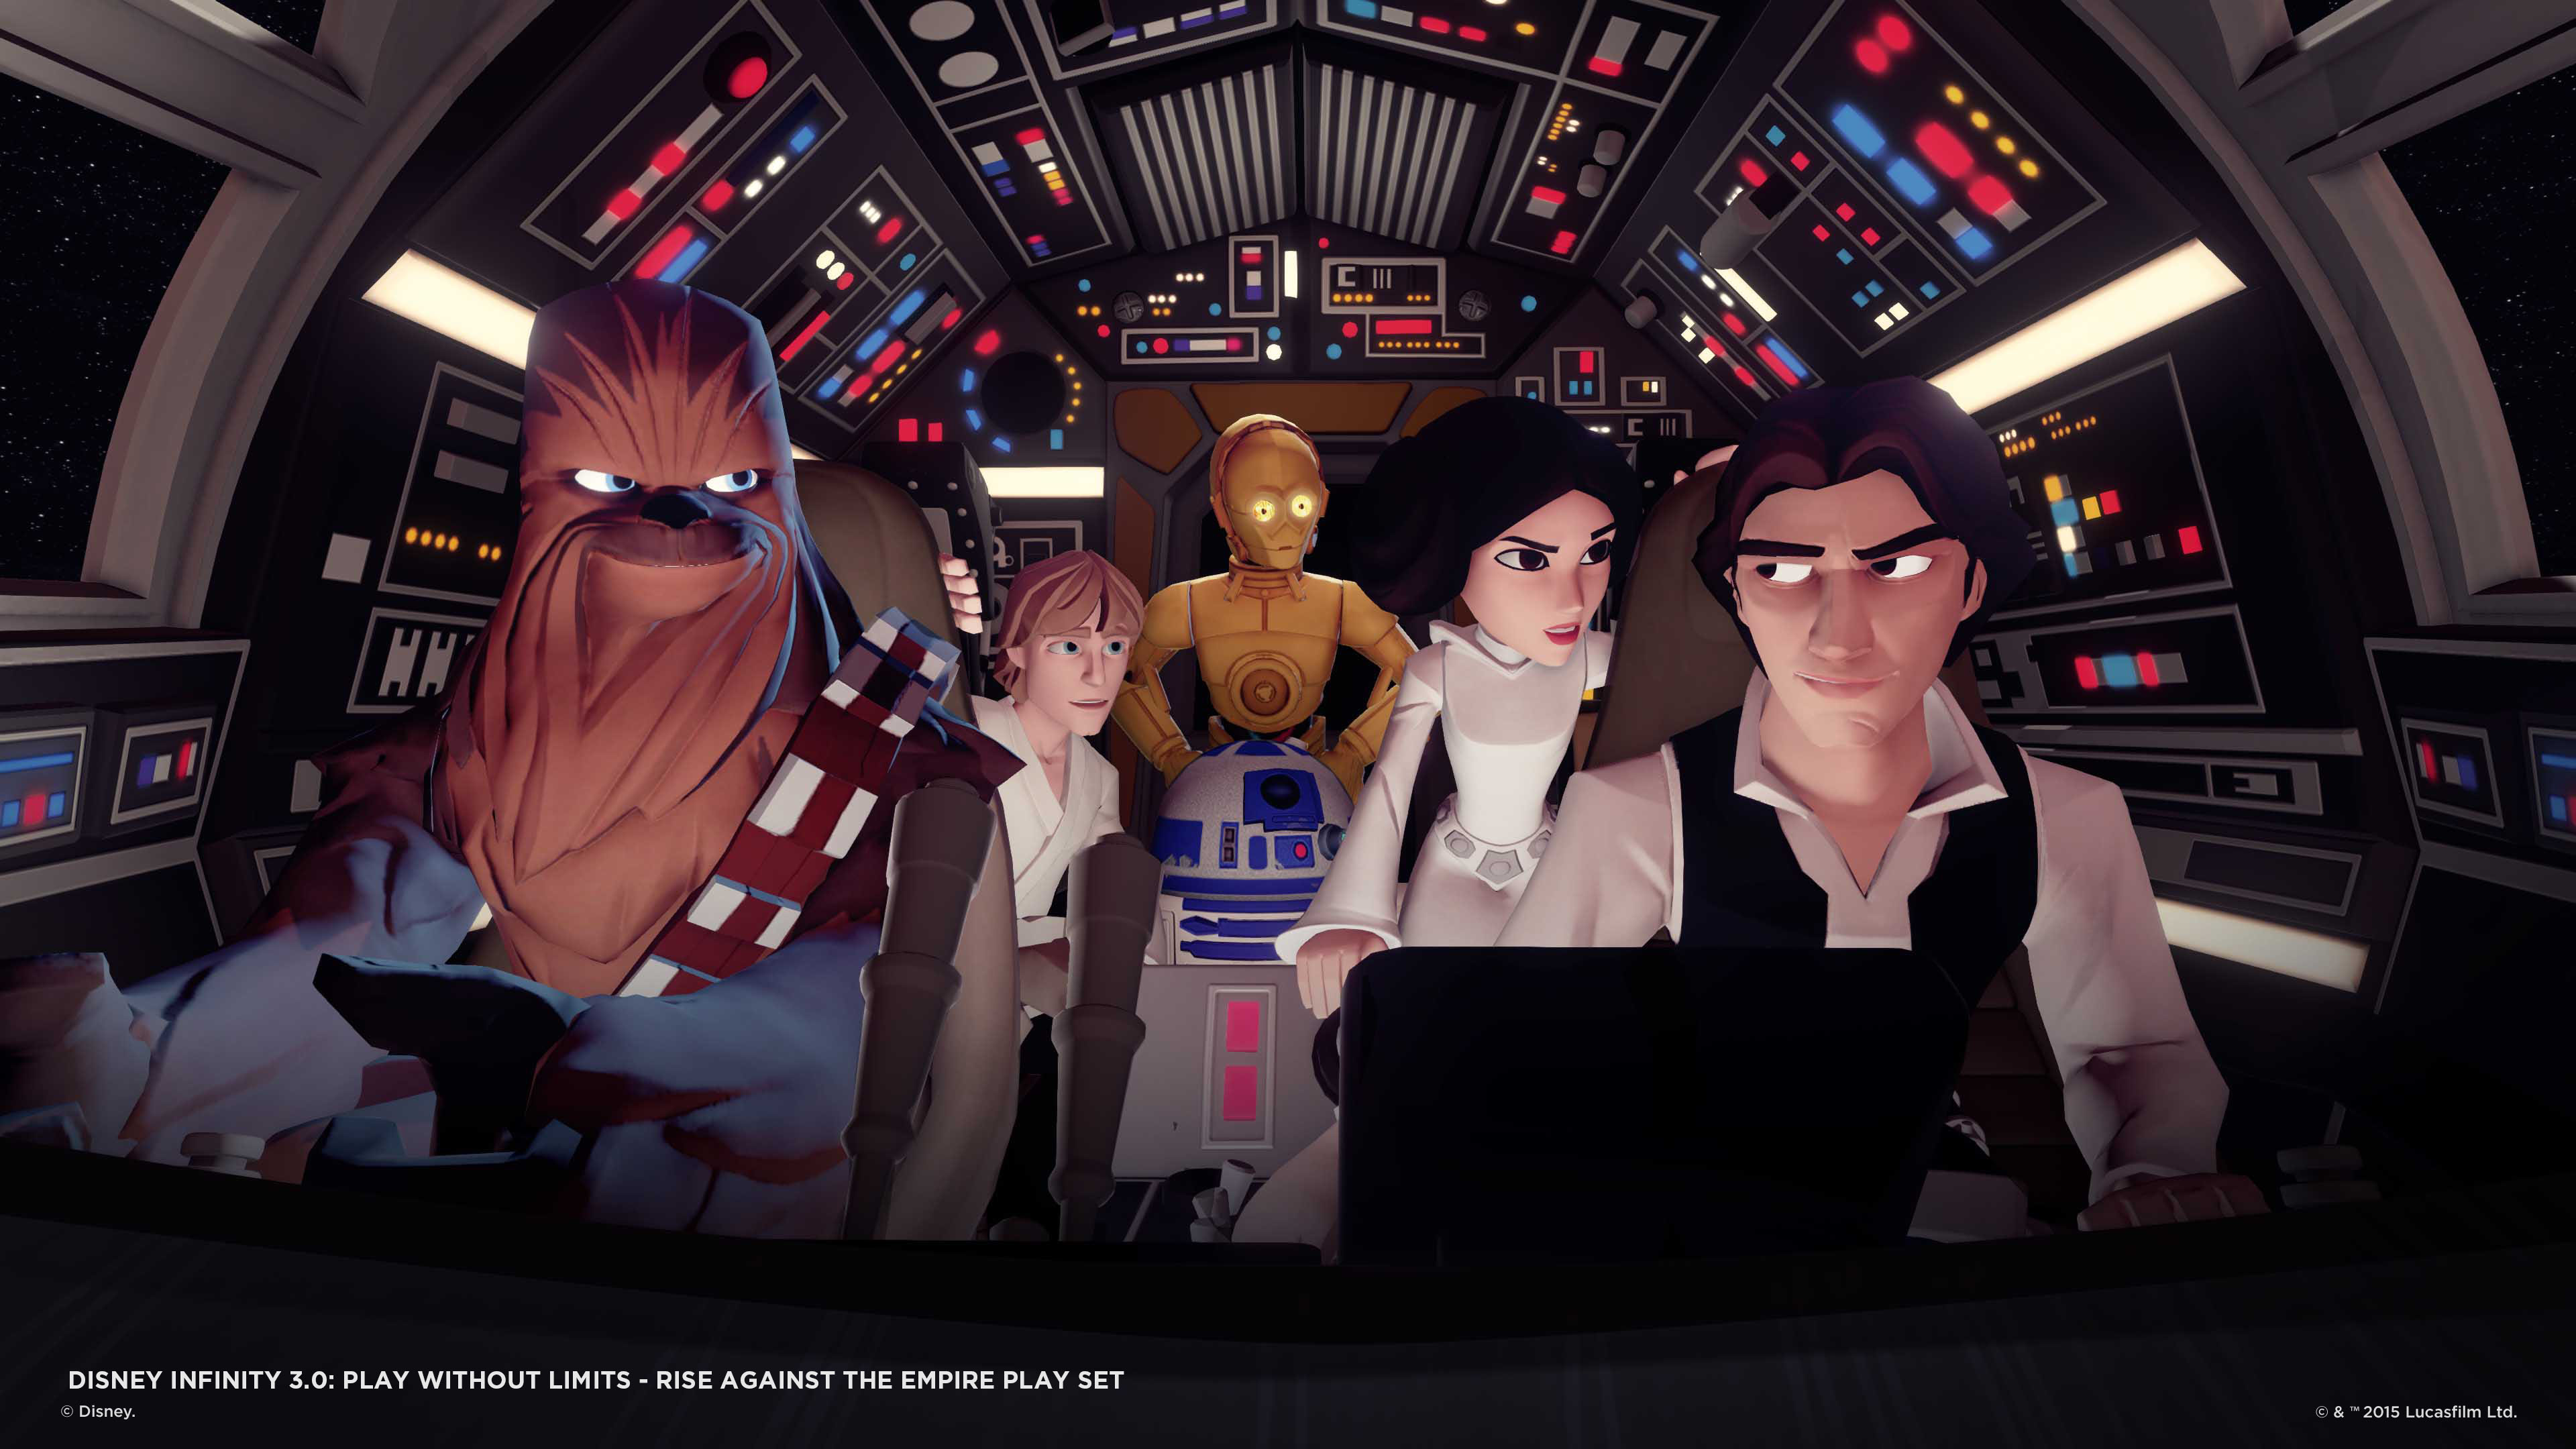 Disney Infinity 3.0 loaded with Star Wars and game-play enhancements